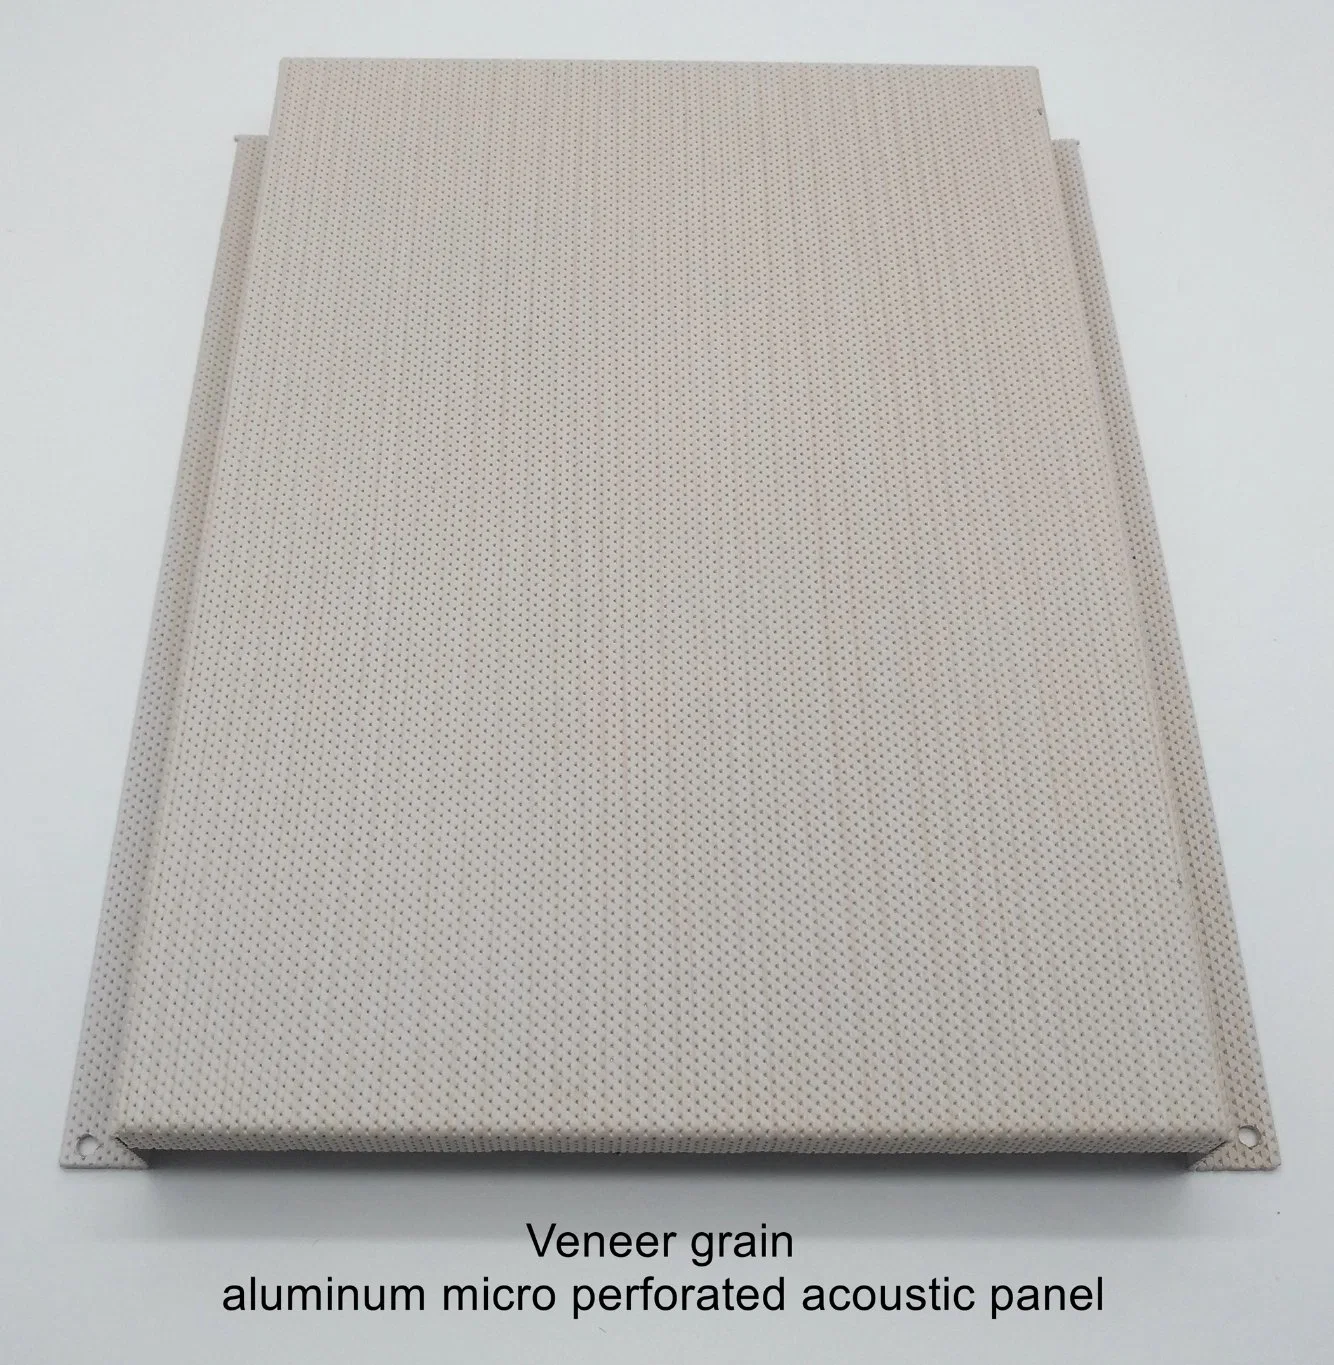 Wood Veneer Incombustible Aluminum Micro Perforated Acoustic Panel Interior Decorated Soundproofing Building Material